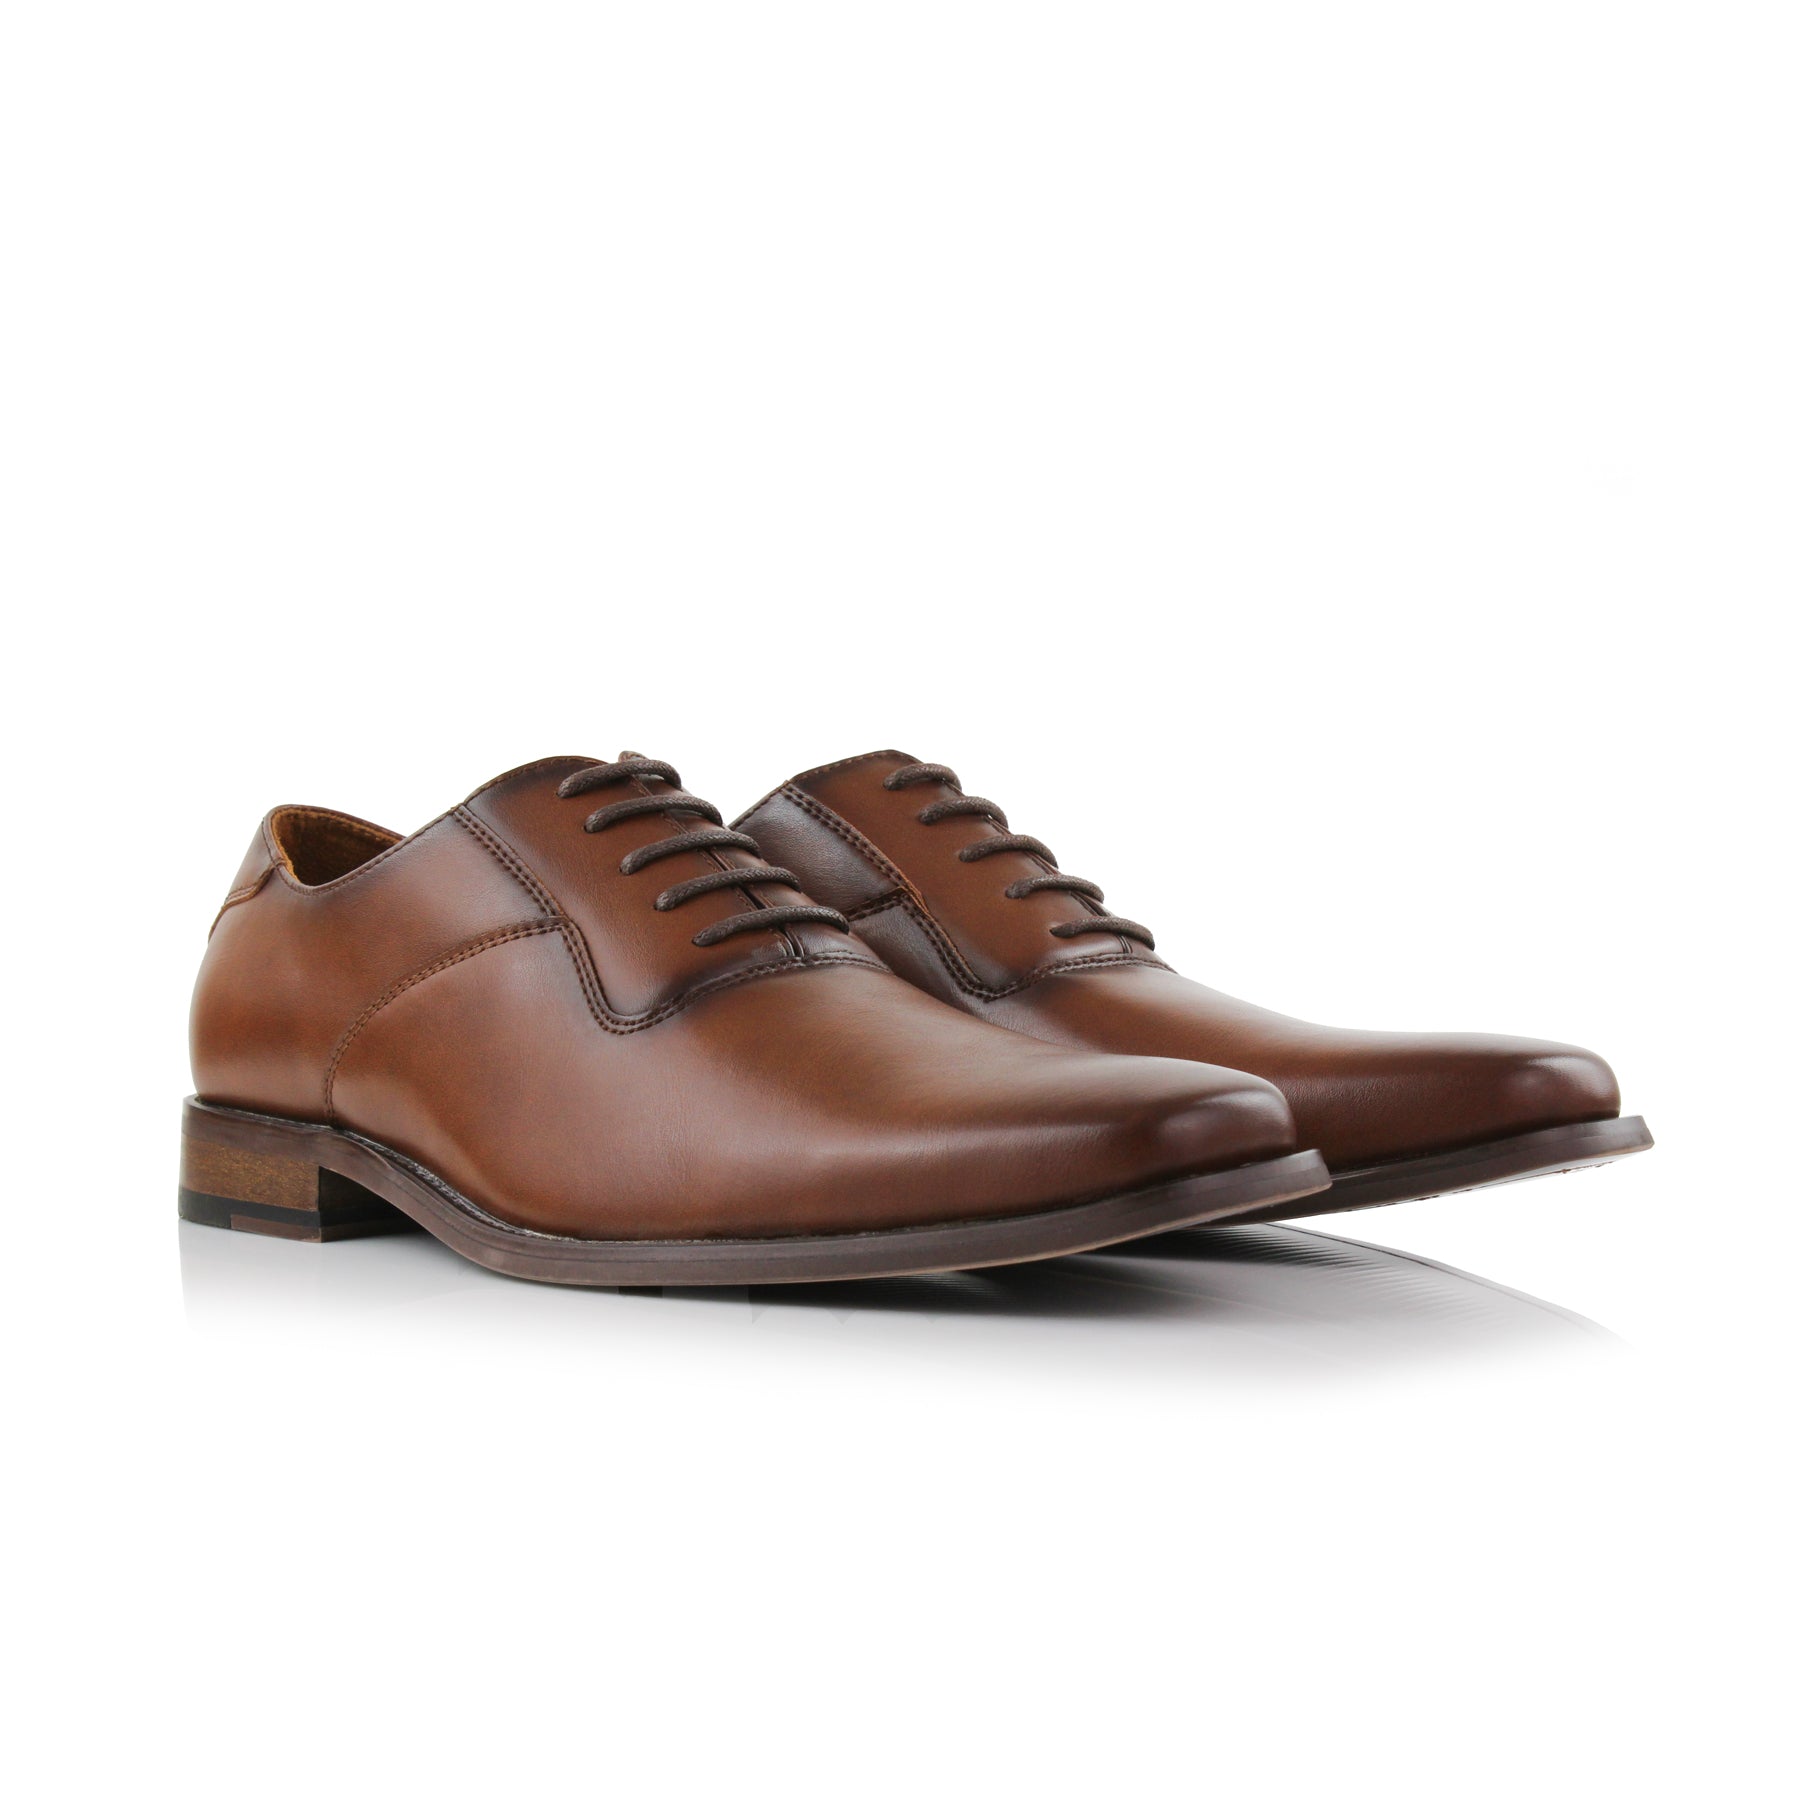 Classic Tuxedo Oxfords | Jeremiah by Ferro Aldo | Conal Footwear | Paired Angle View